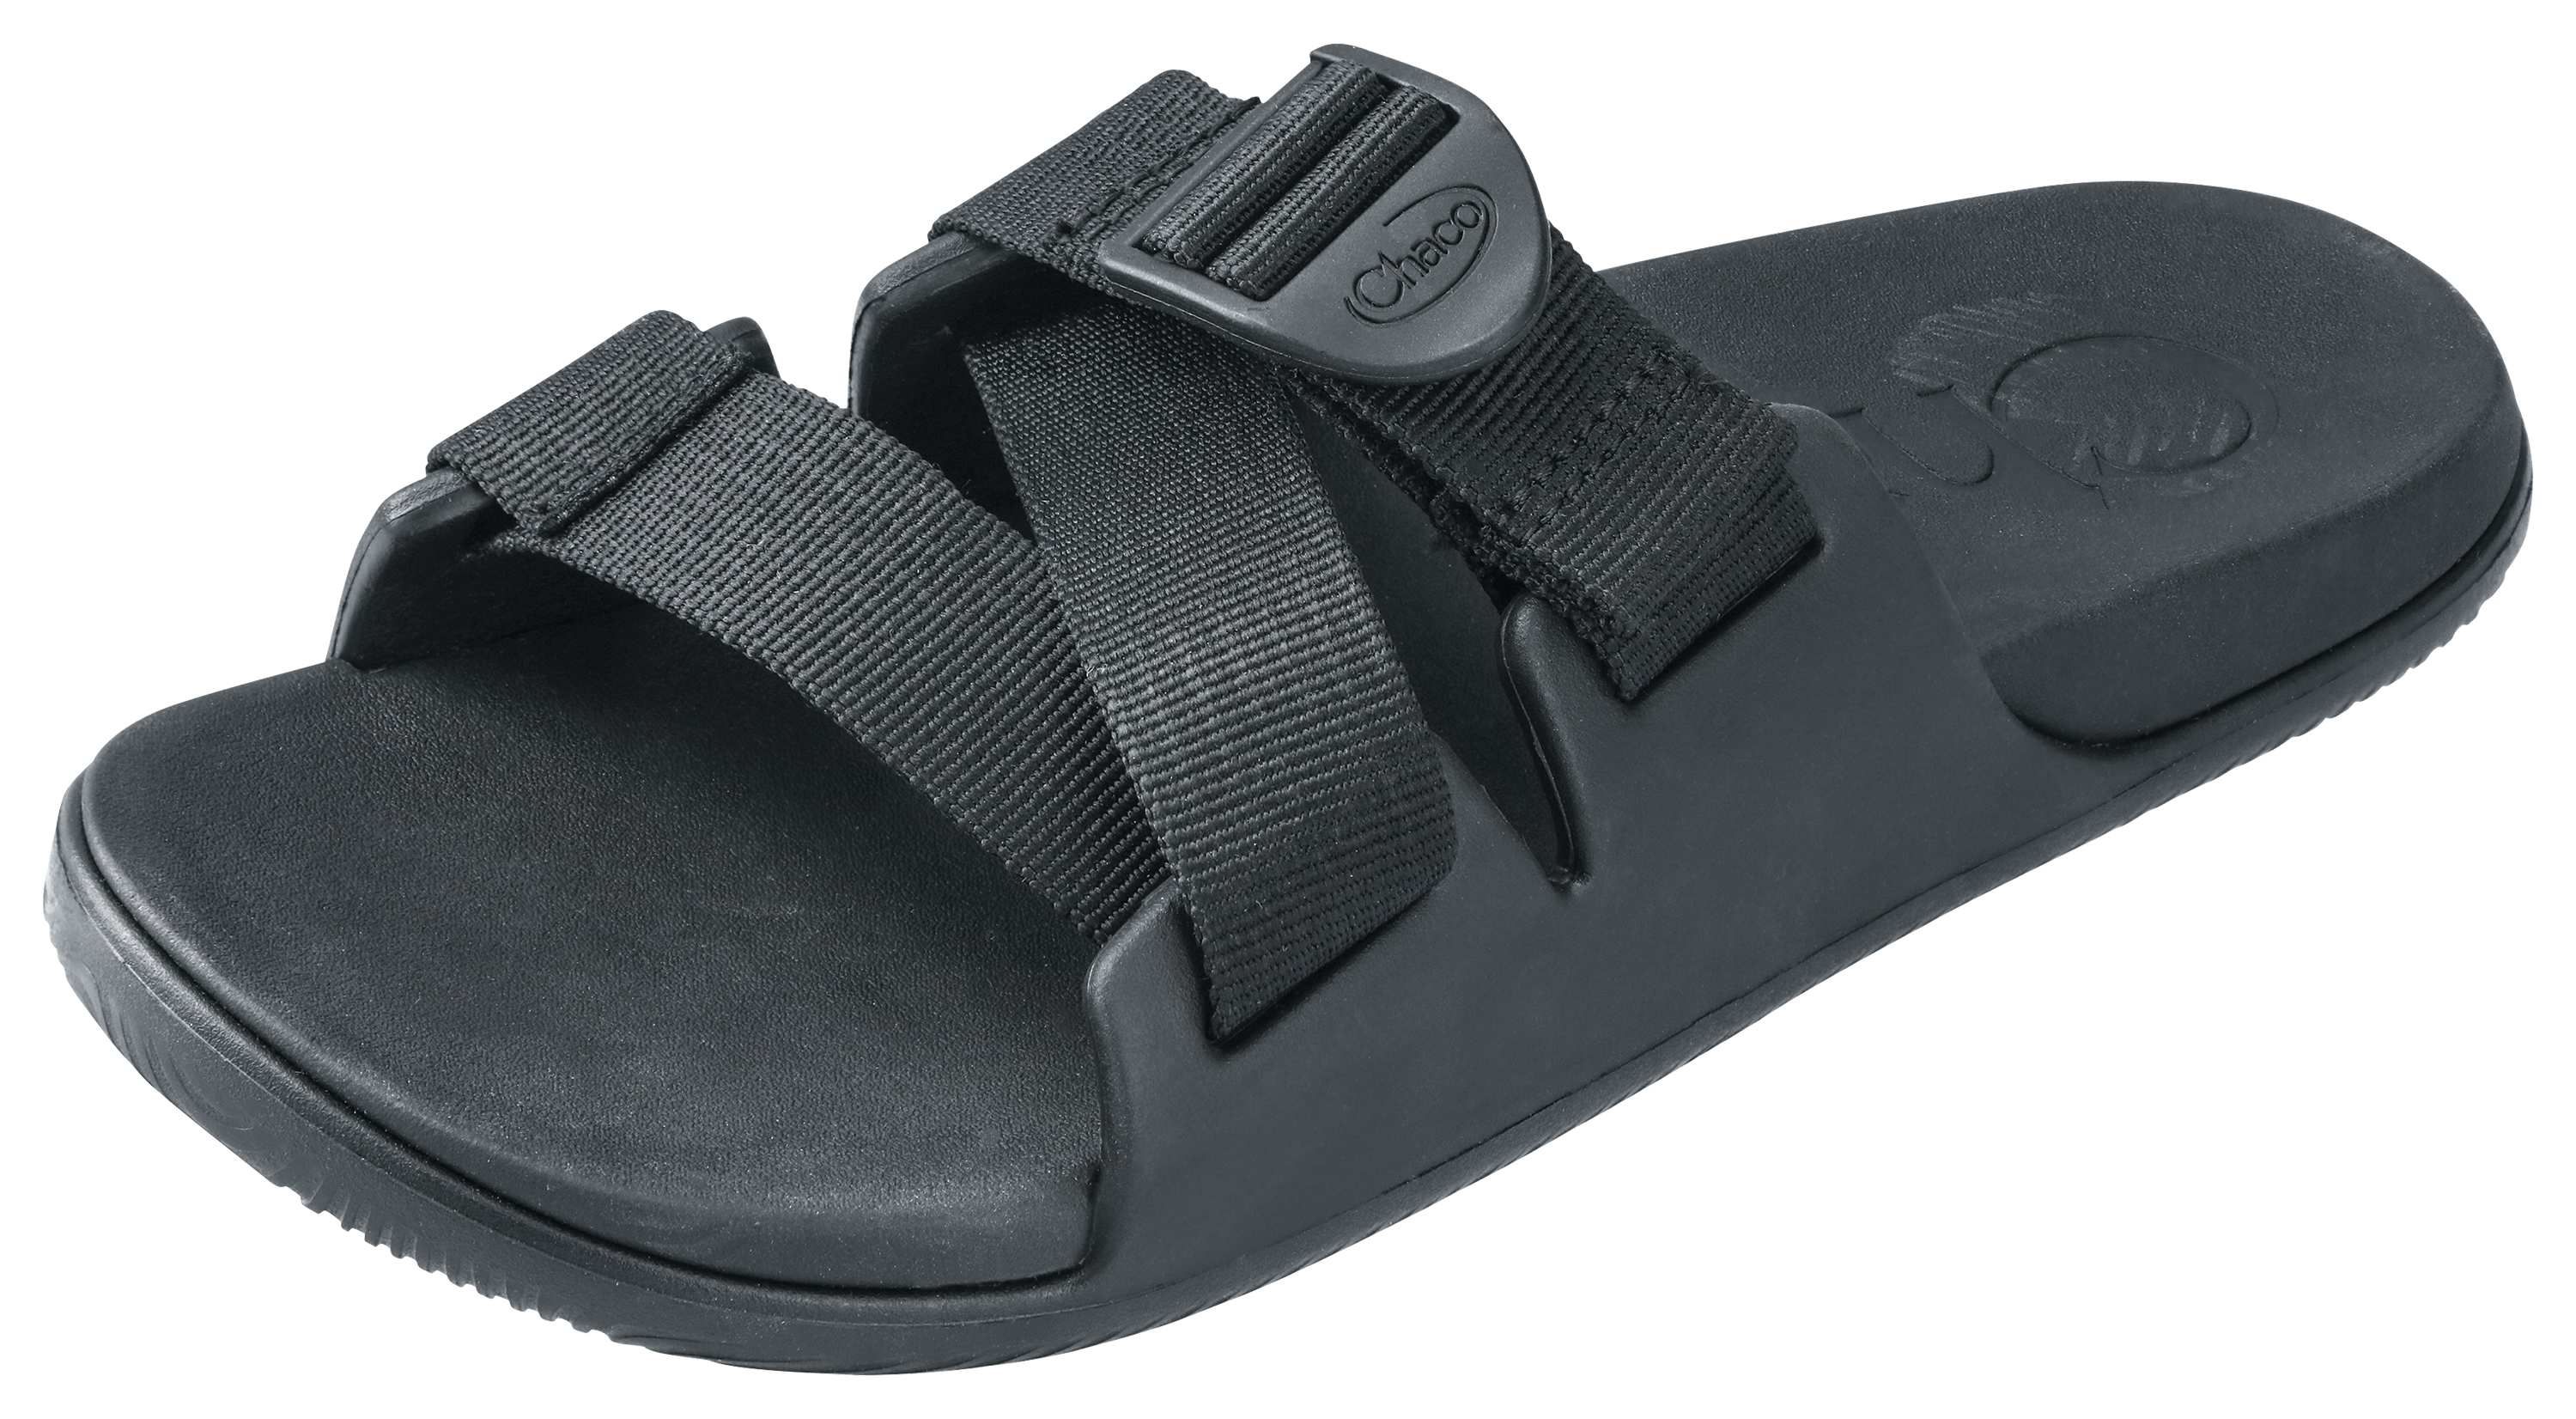 Chaco Chillos Slide Sandals for Ladies Black 11M